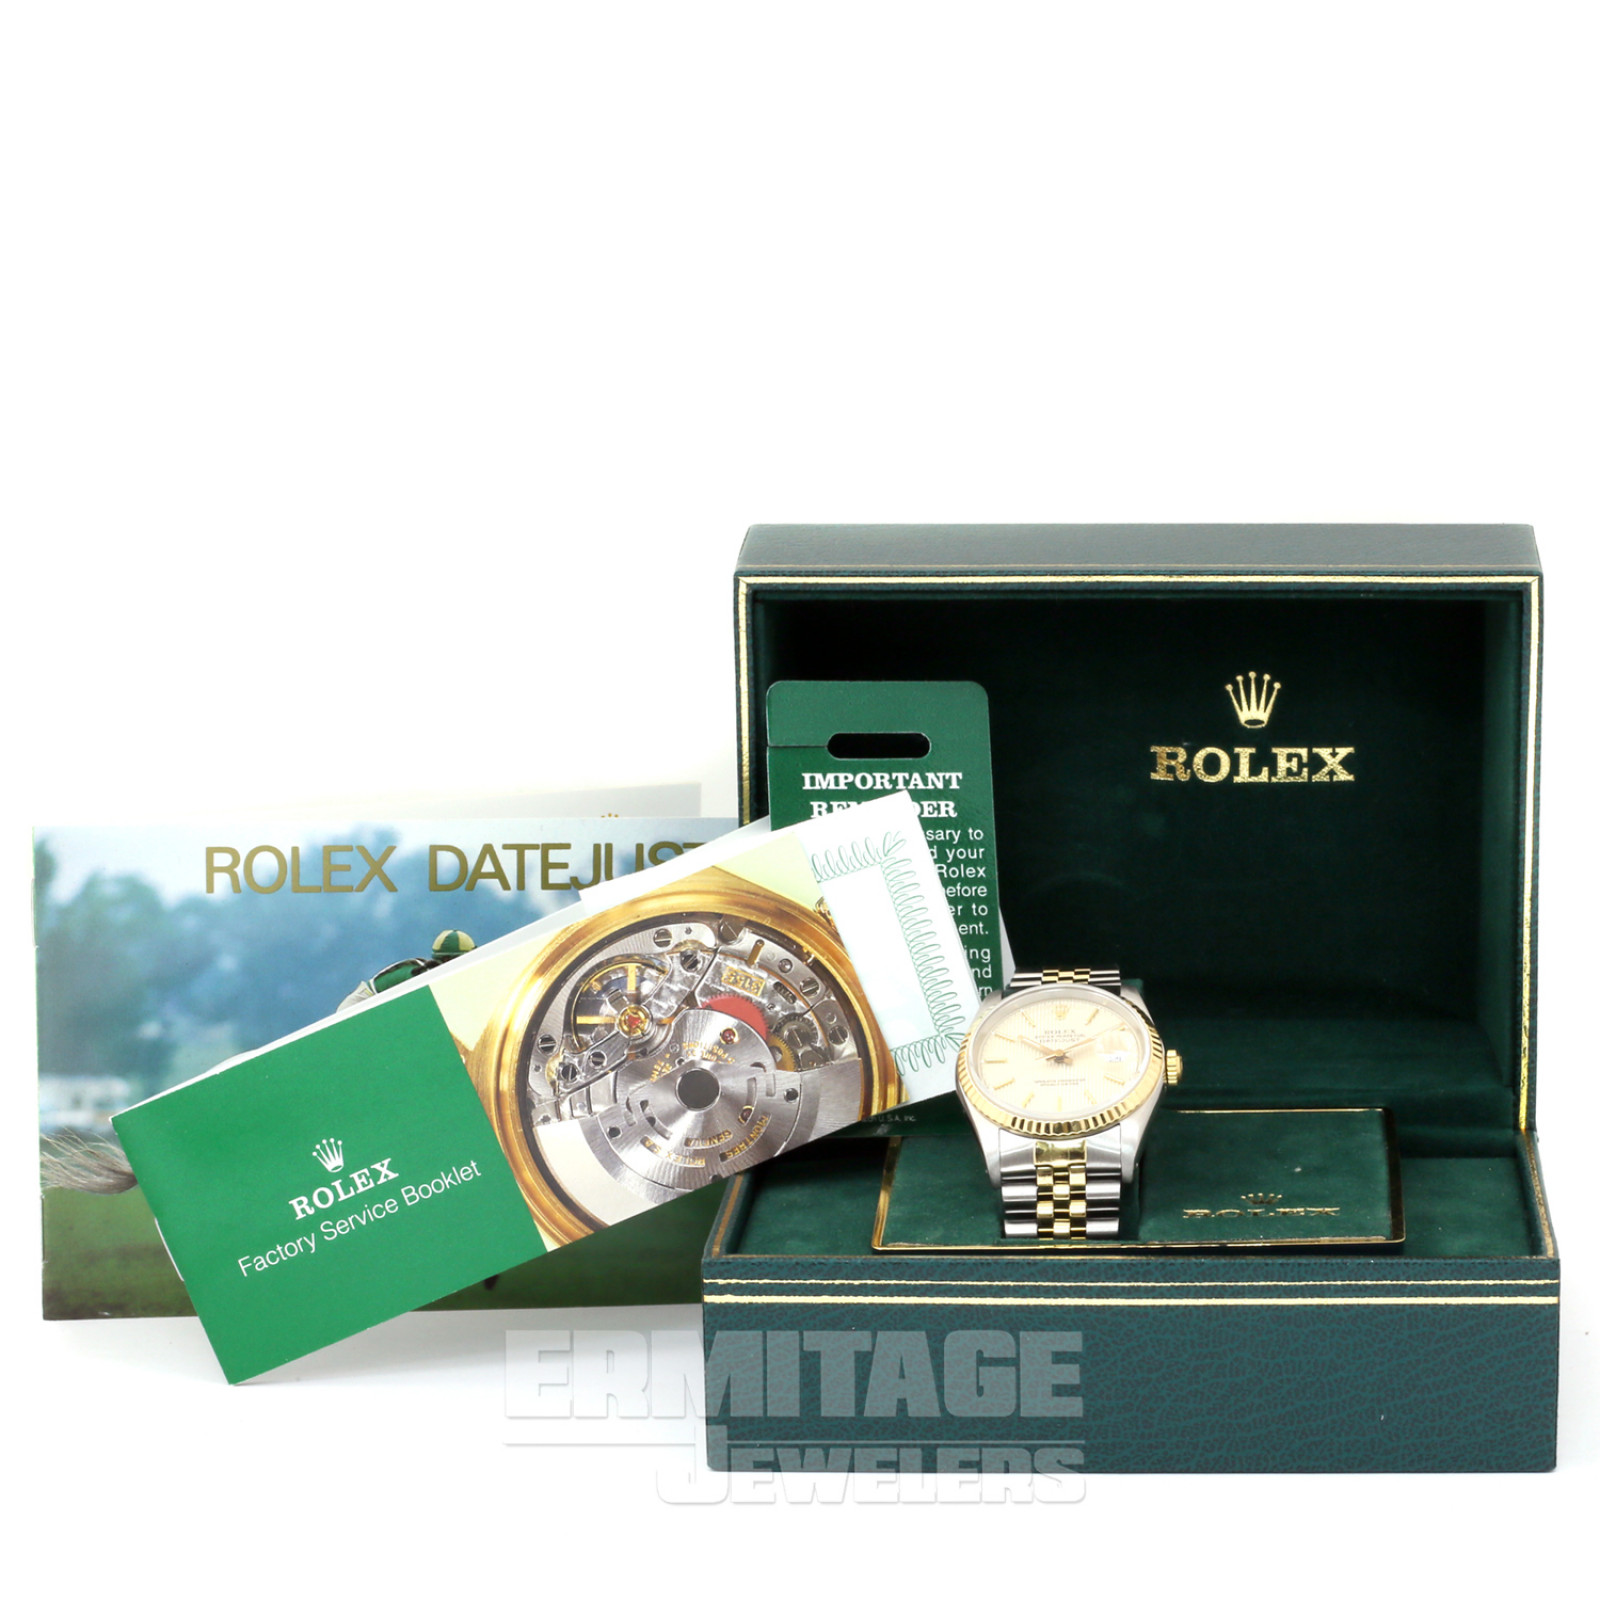 Tapestry Style Rolex Datejust 16233 Gold & Steel